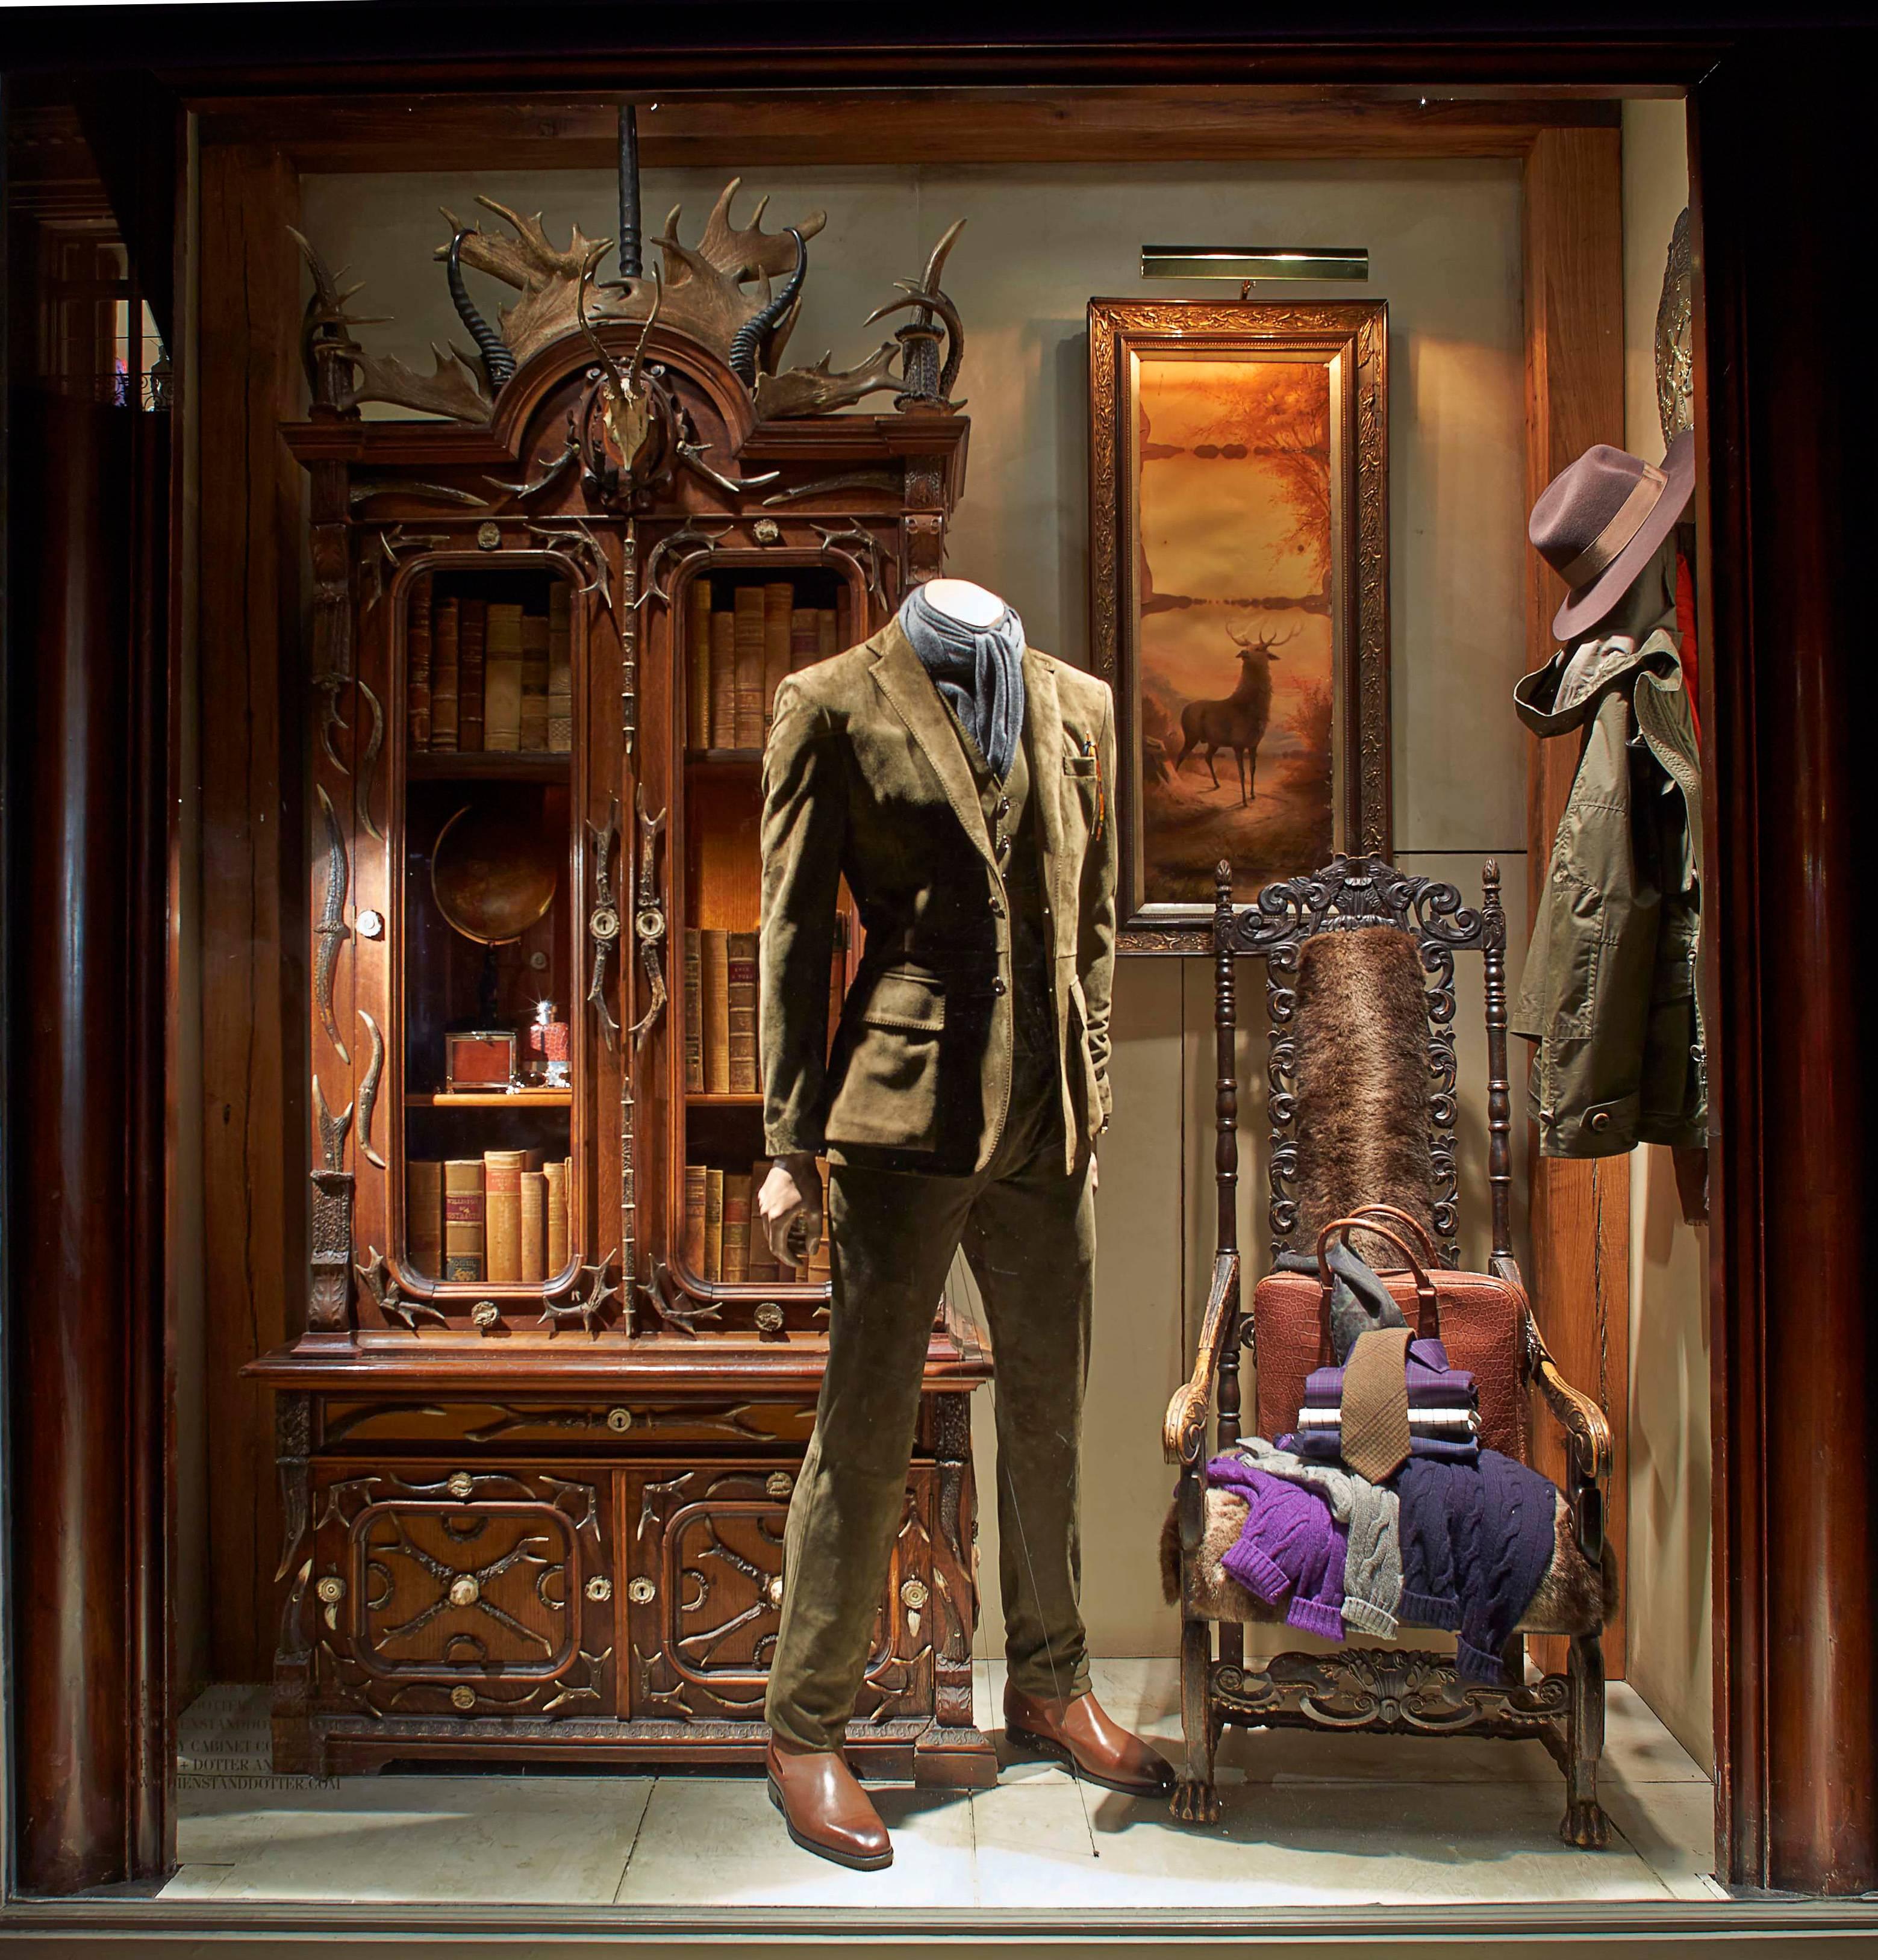 German fantasy historic revival hunting trophy cabinet, origin: Germany, circa 1870.

This cabinet was featured in the Ralph Lauren Madison Avenue Fall Fashion Week Windows. See included photograph.

This extraordinary cabinet was most likely made